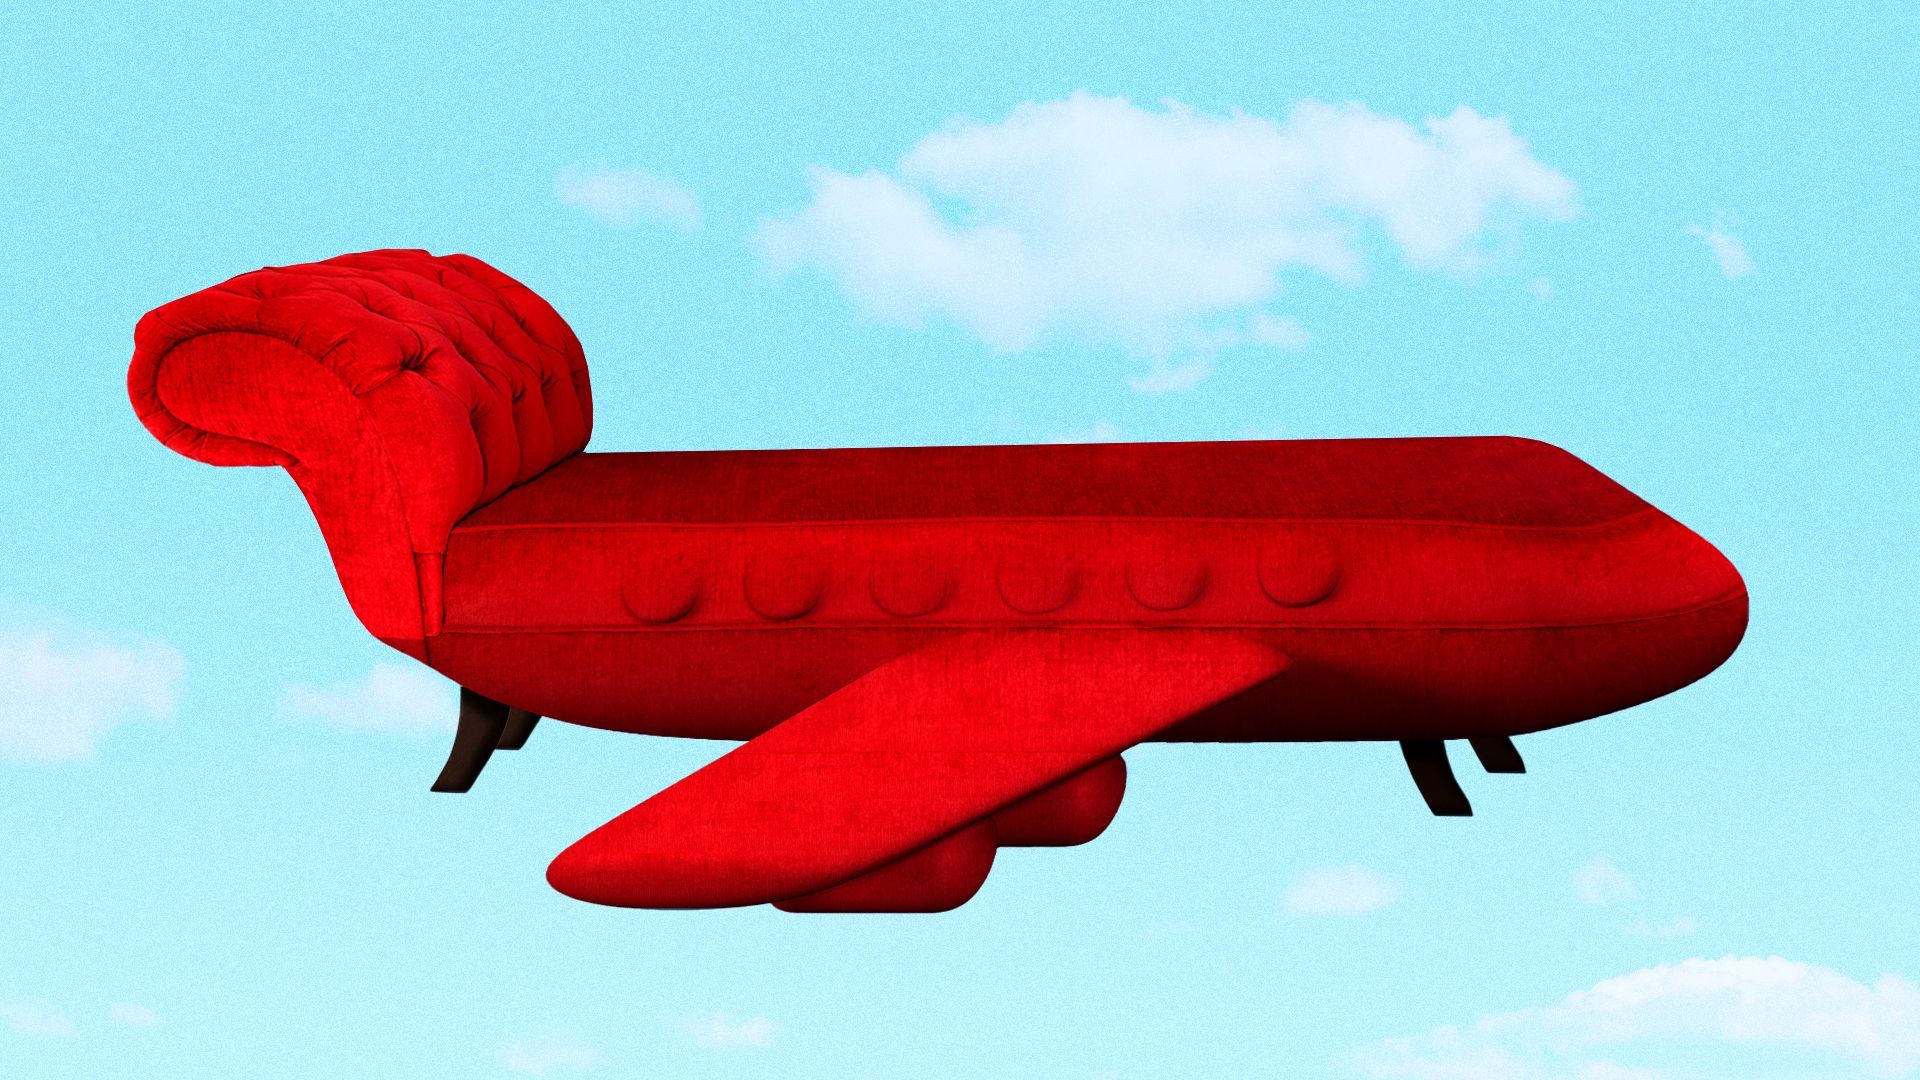 Illustration of a fainting couch shaped like an airplane flying in the sky with clouds